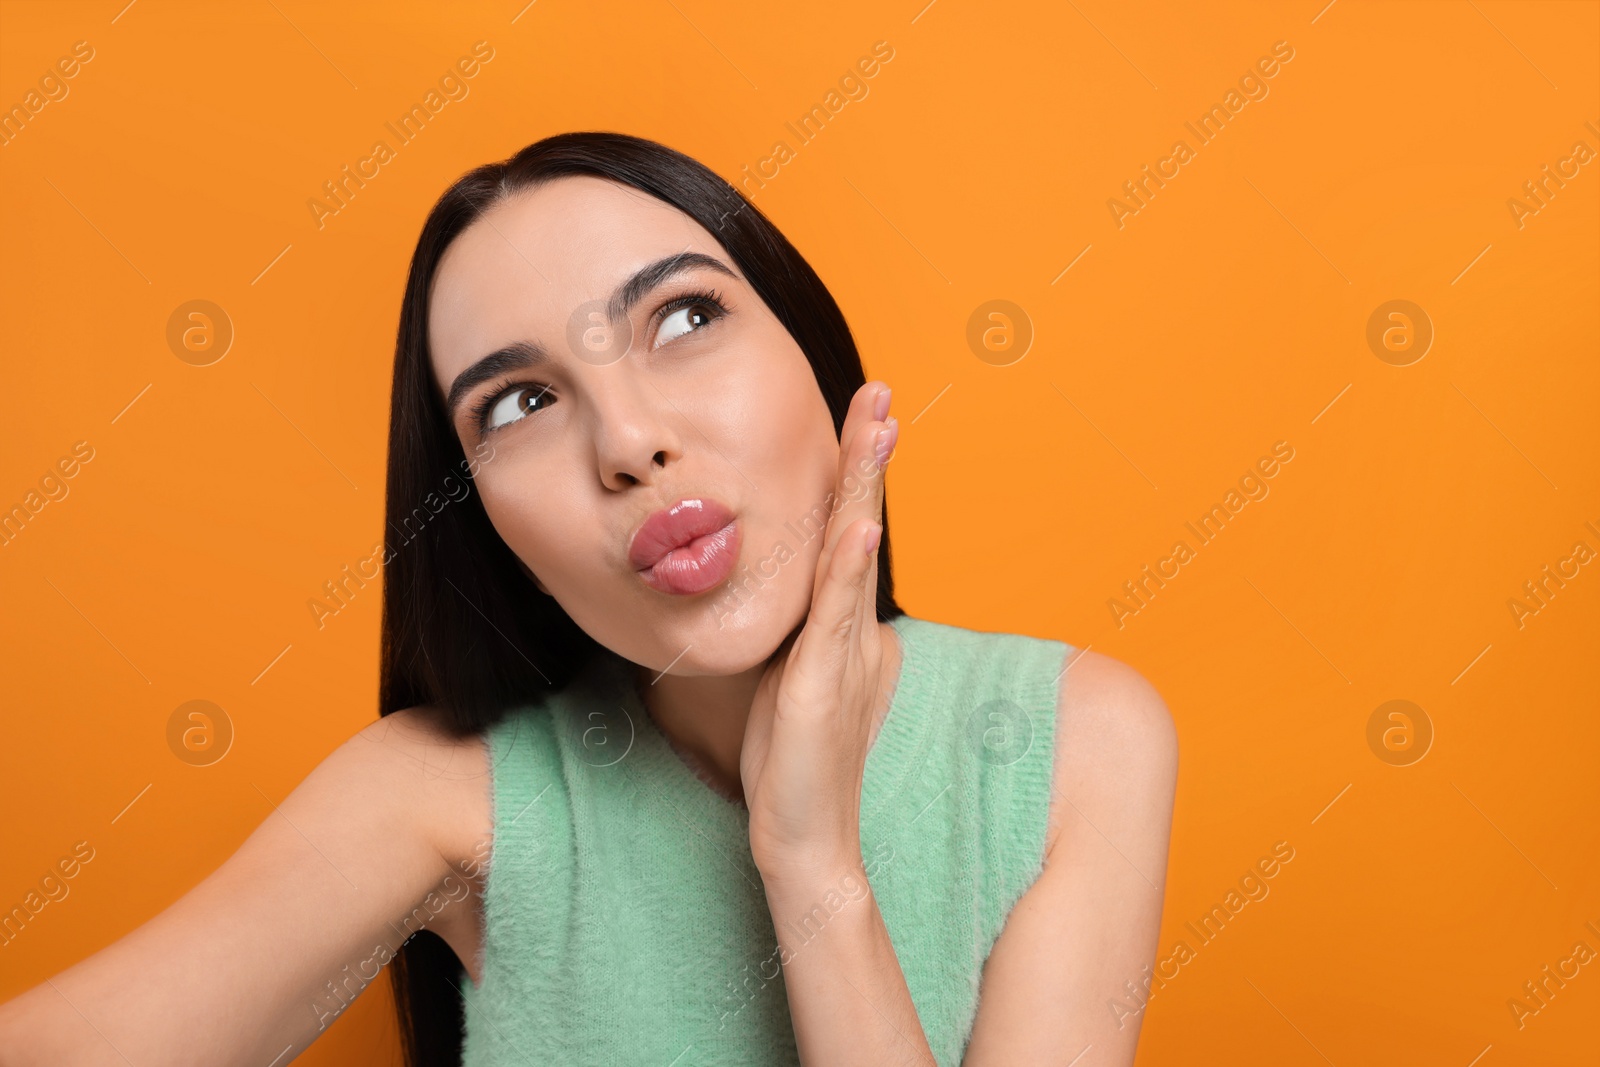 Photo of Beautiful young woman taking selfie while blowing kiss on orange background. Space for text